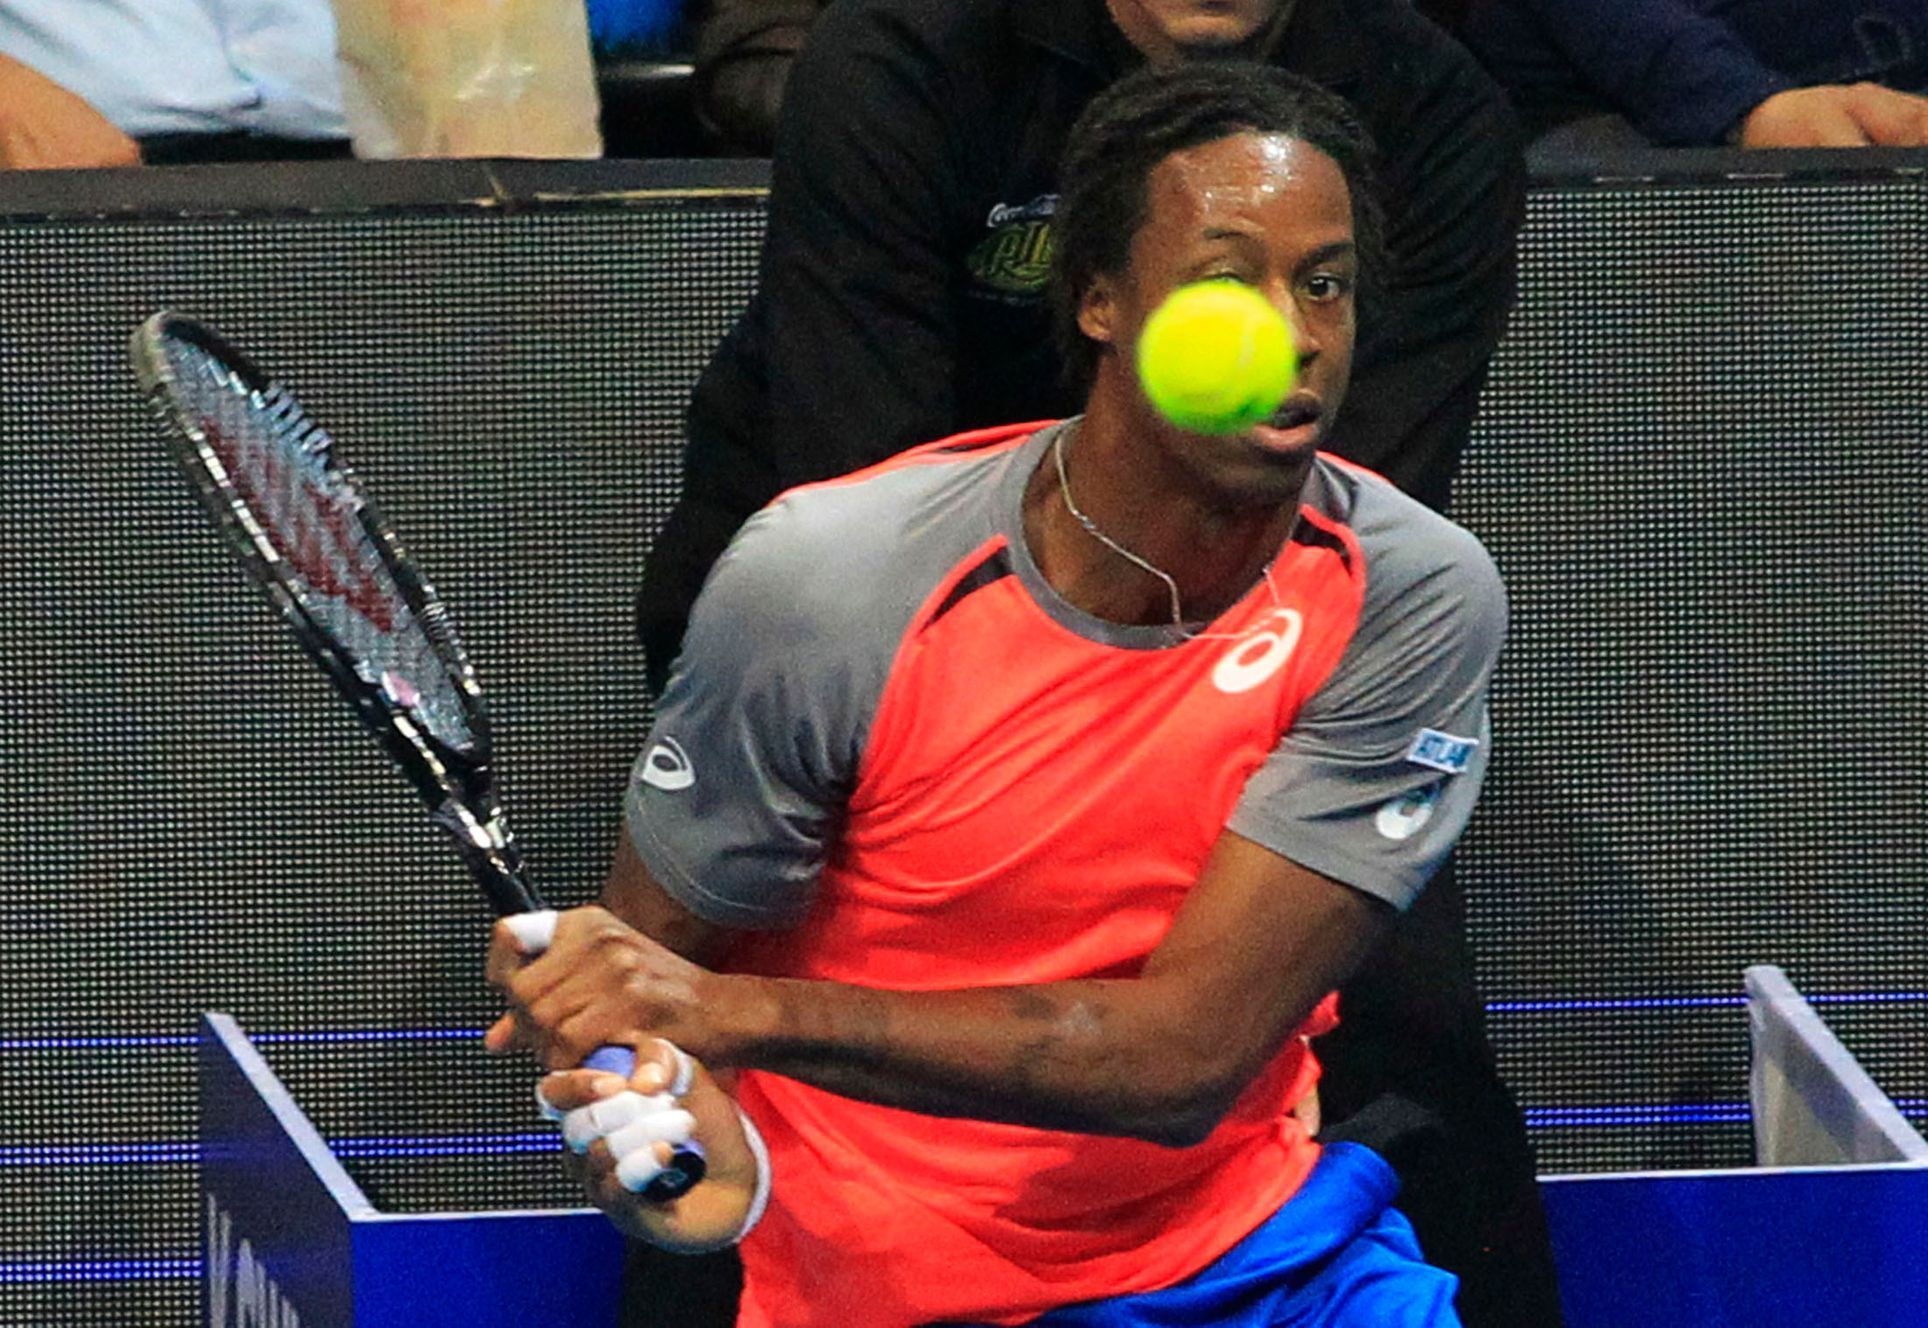 Monfils of the Indian Aces team competes during a men's single match against Murray of the Manila Mavericks team at the International Premier Tennis League in Manila